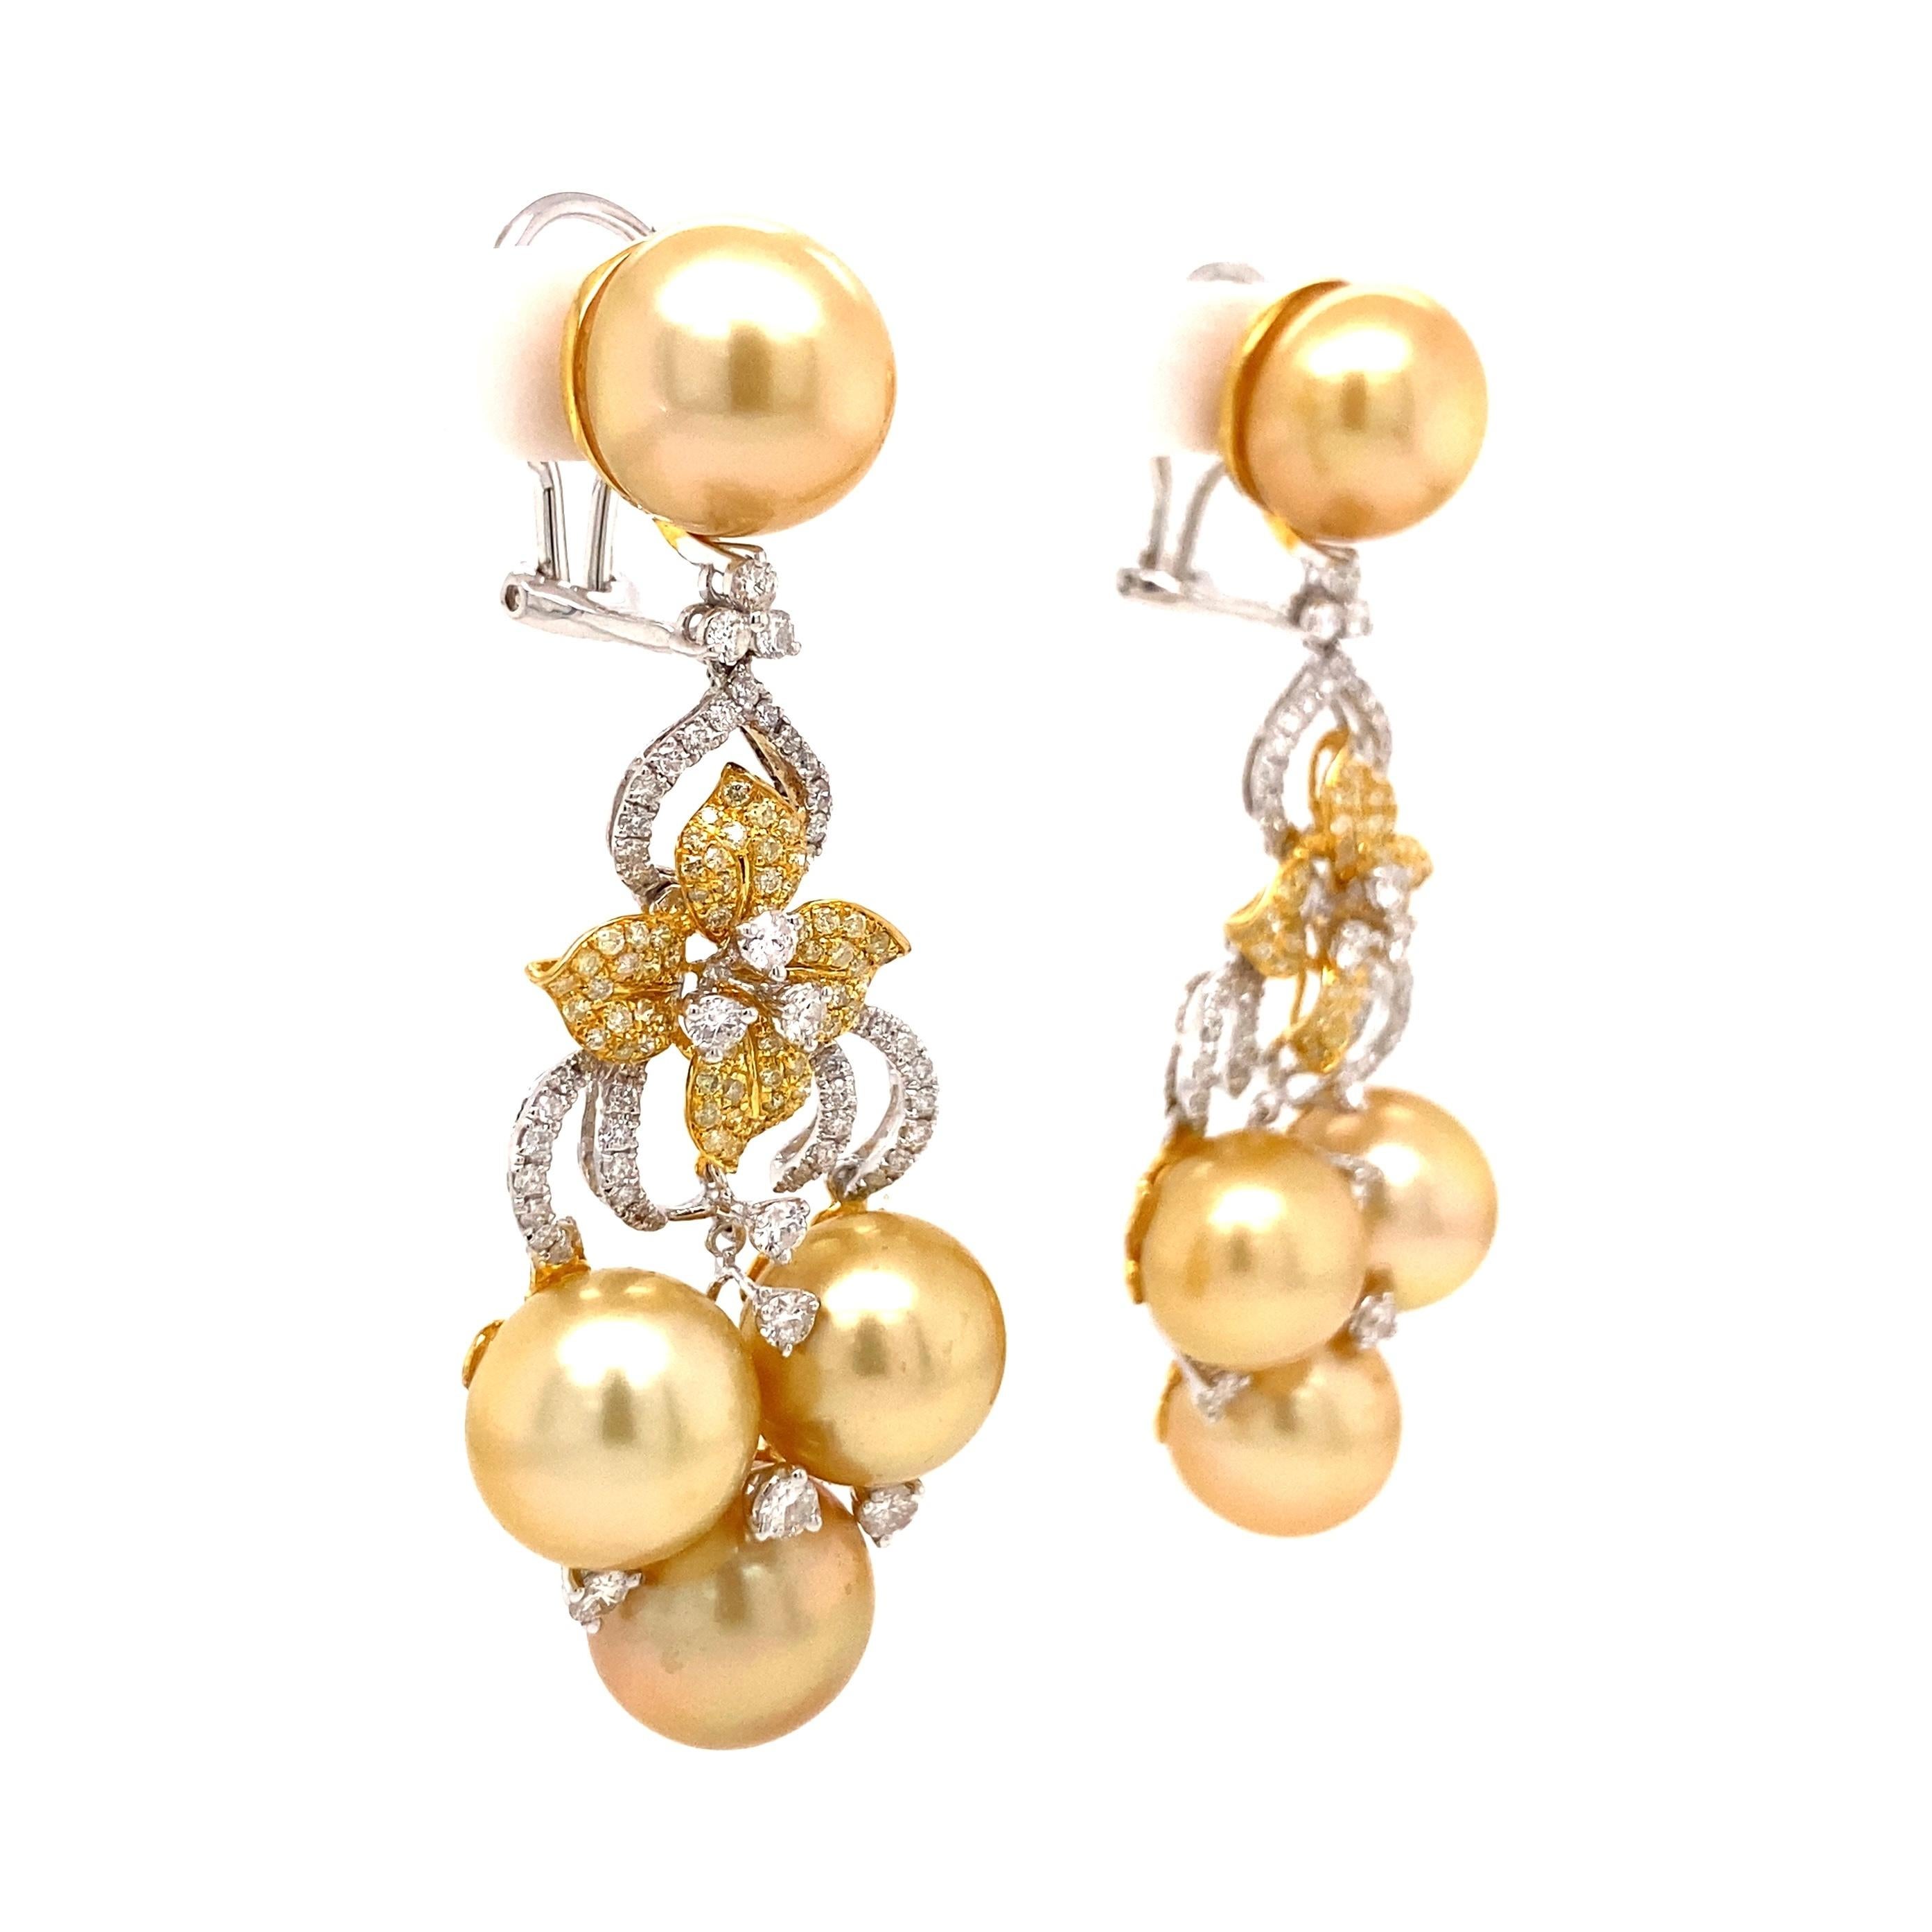 
Simply Beautiful Golden South Sea Pearl and Diamond Drop Earrings. Each earring Hand set with 5-11.5mm South Sea Pearls and accented with  White and Fancy Yellow Diamonds, approx. 2.27tcw Hand crafted 18K Yellow Gold and White Gold mounting.